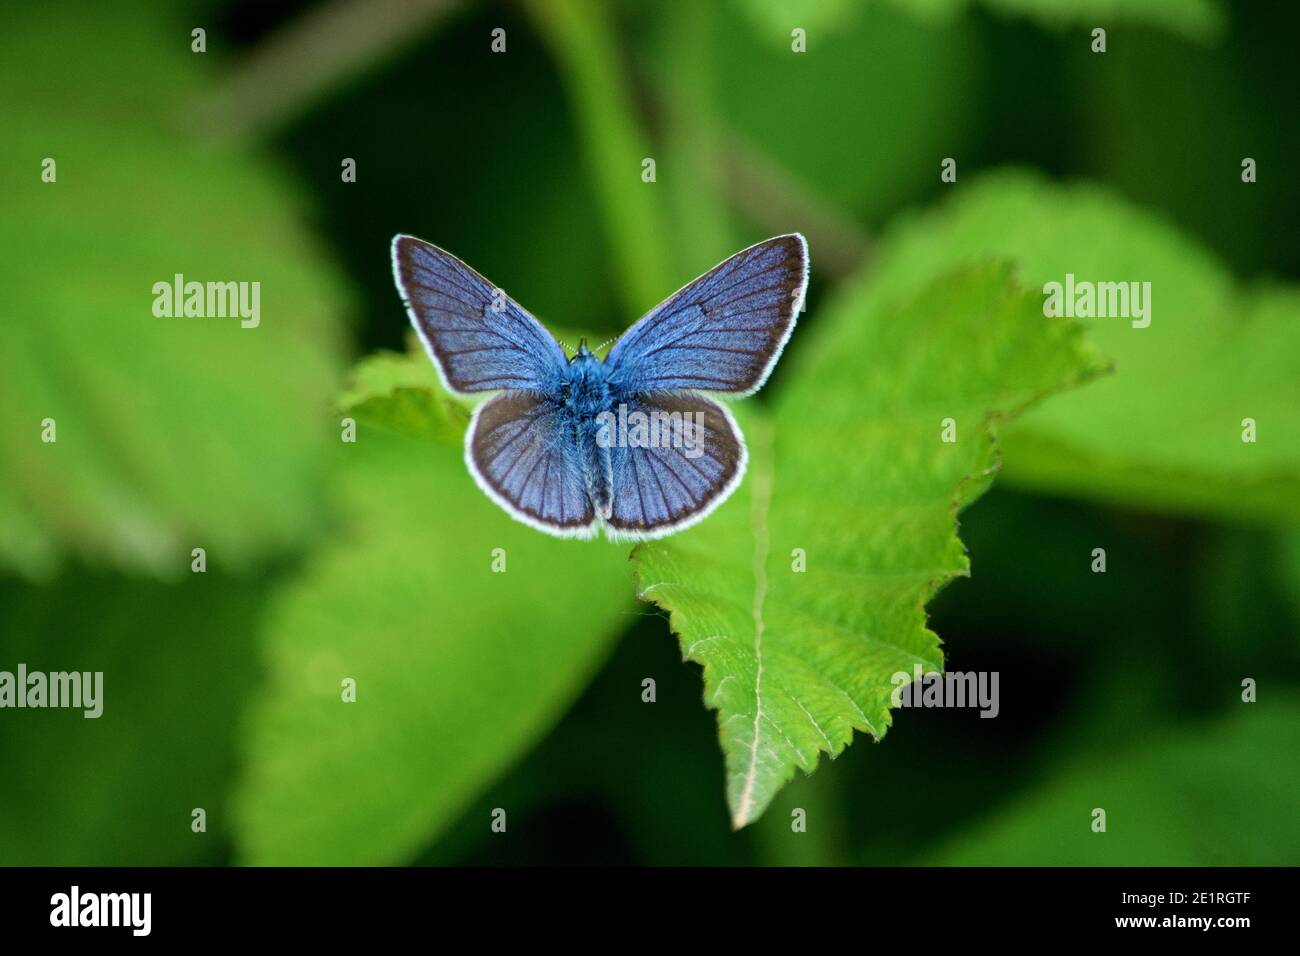 The holly blue butterfly (Celastrina argiolus) on a grass steam - close-up Stock Photo